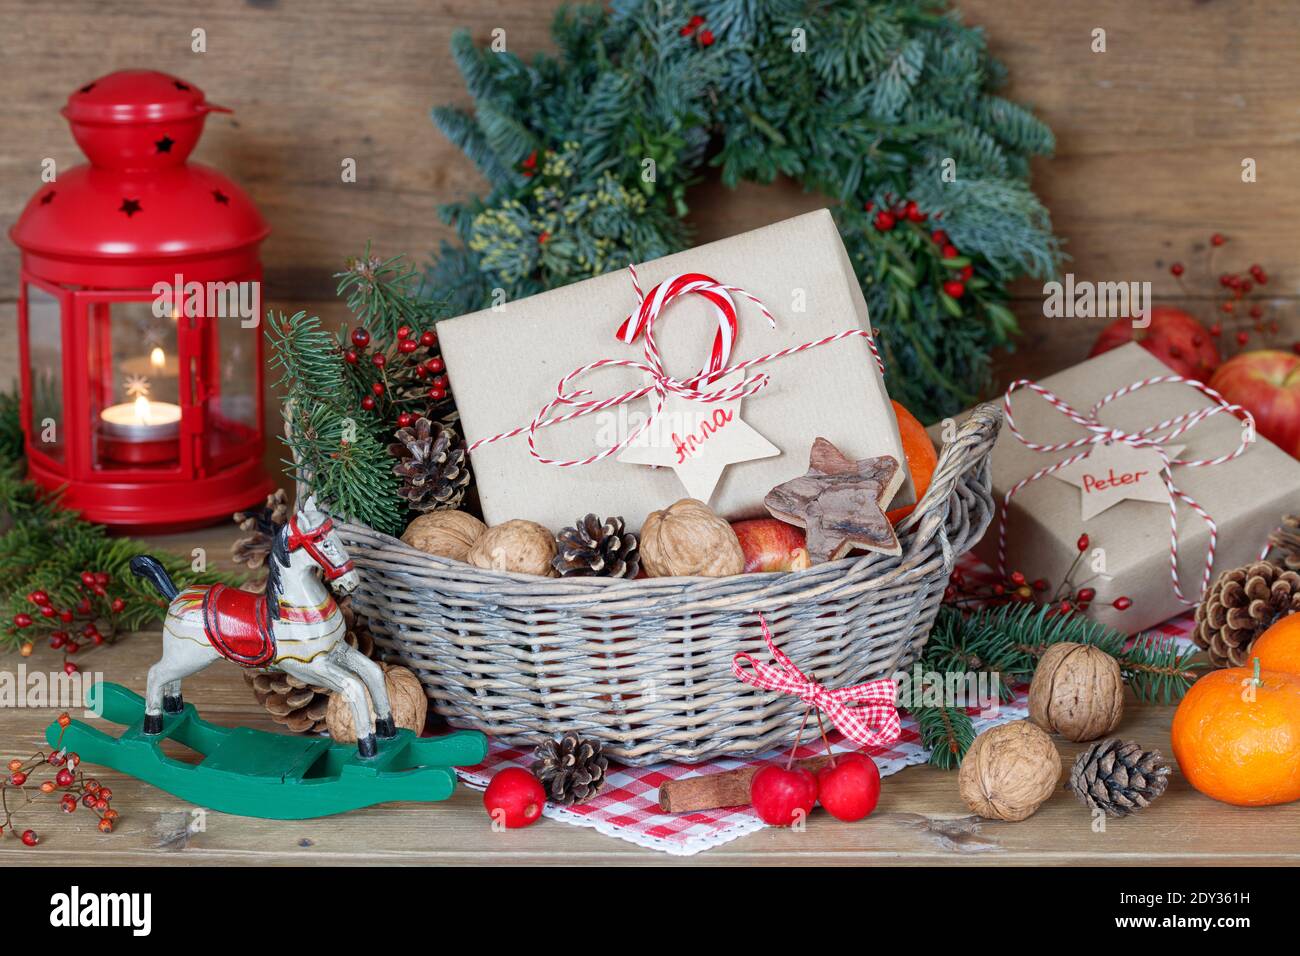 christmas decoration with present box, apples, walnuts and mandarins in basket Stock Photo